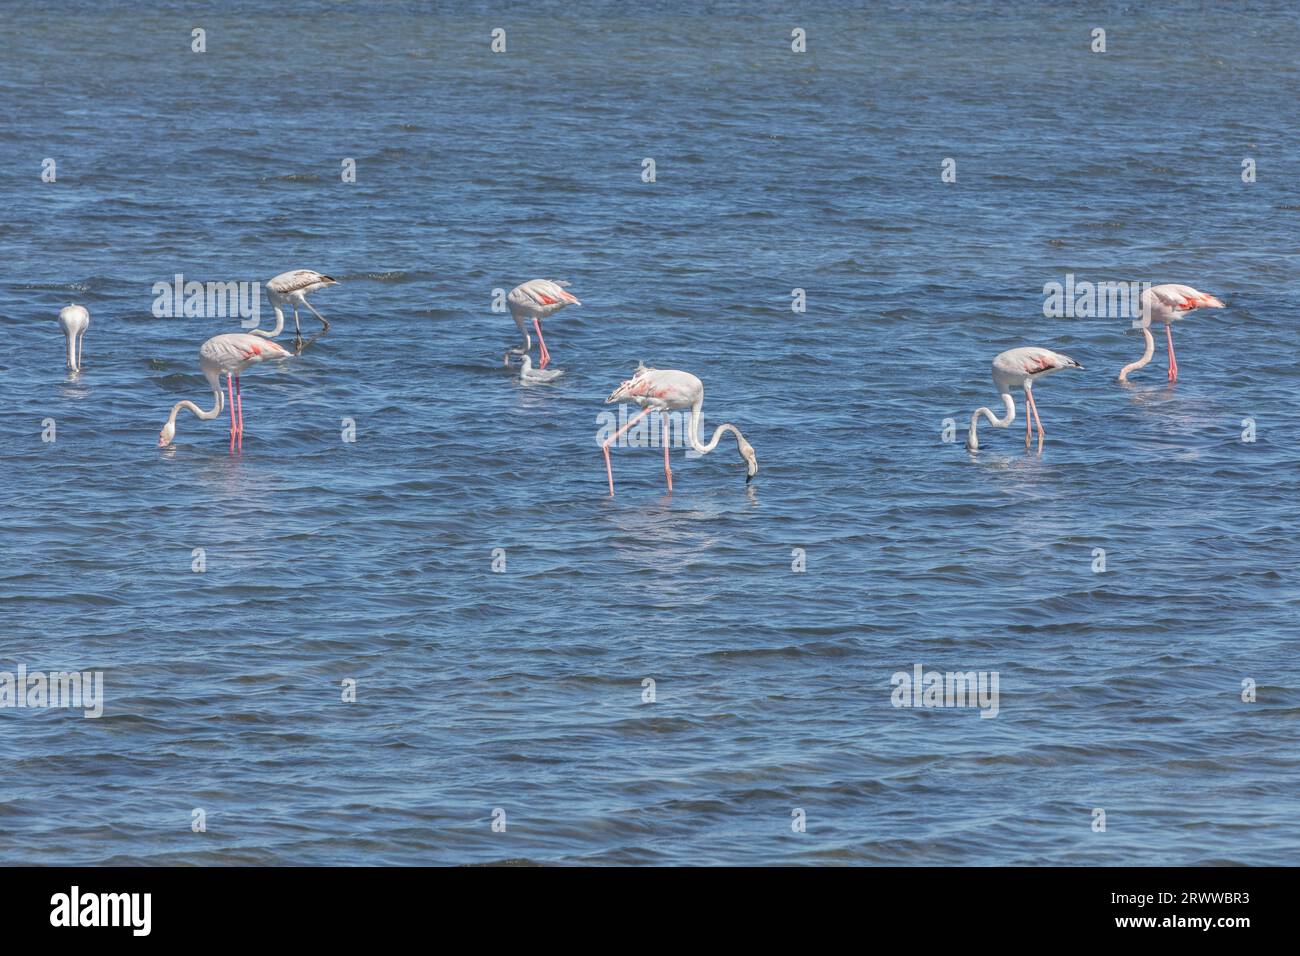 Flamingos wading in the Mediterranean Sea at La Franqui, South of France. Stock Photo